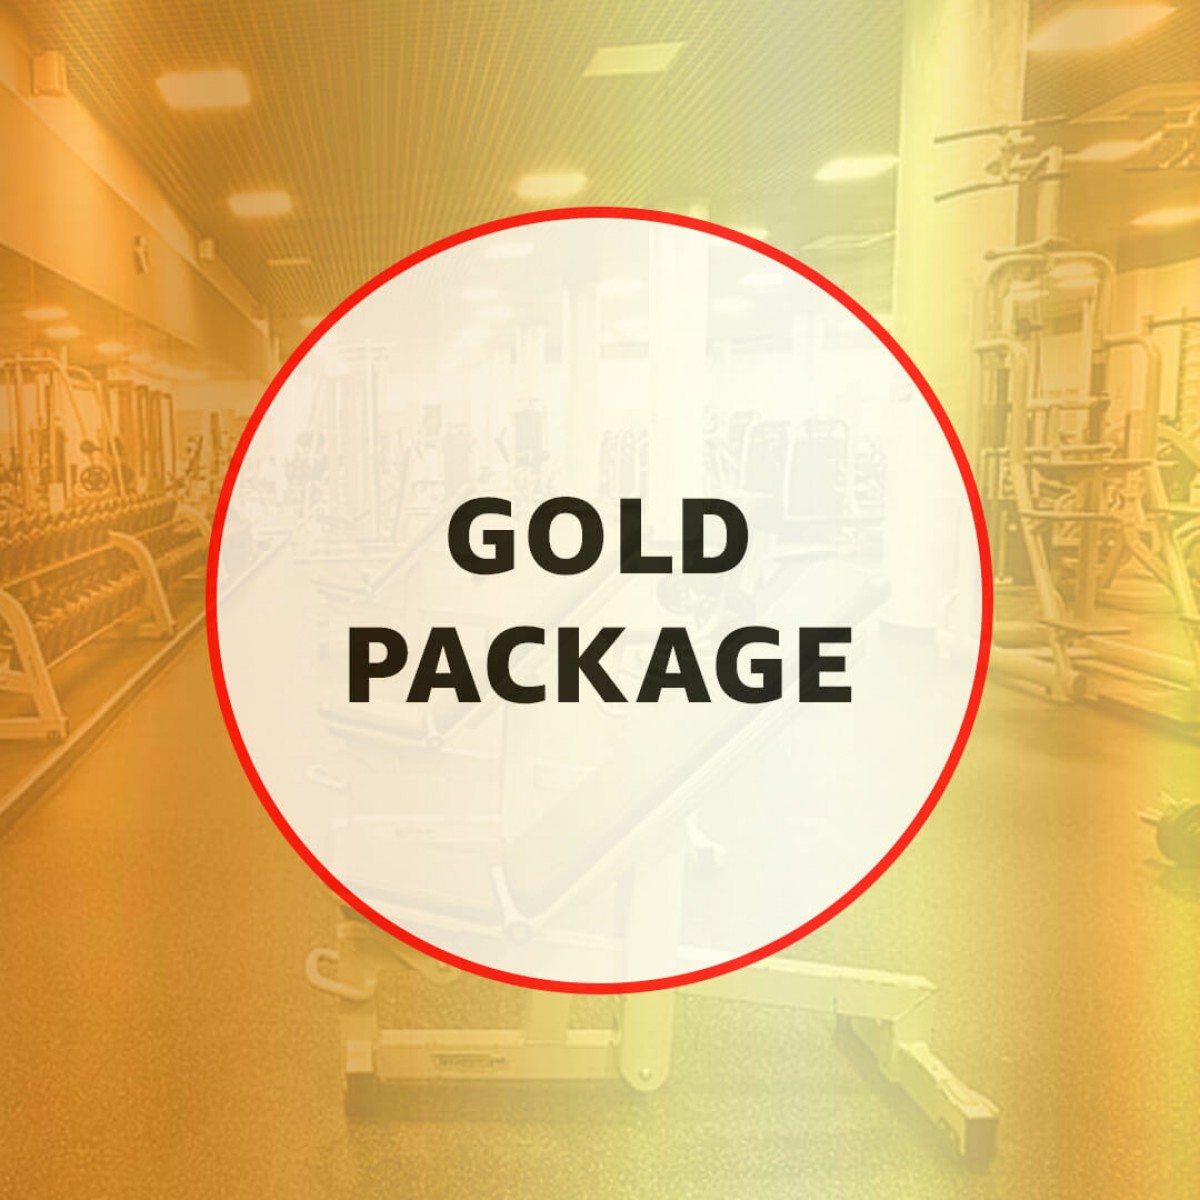 University, College and School Gym - Gold Package